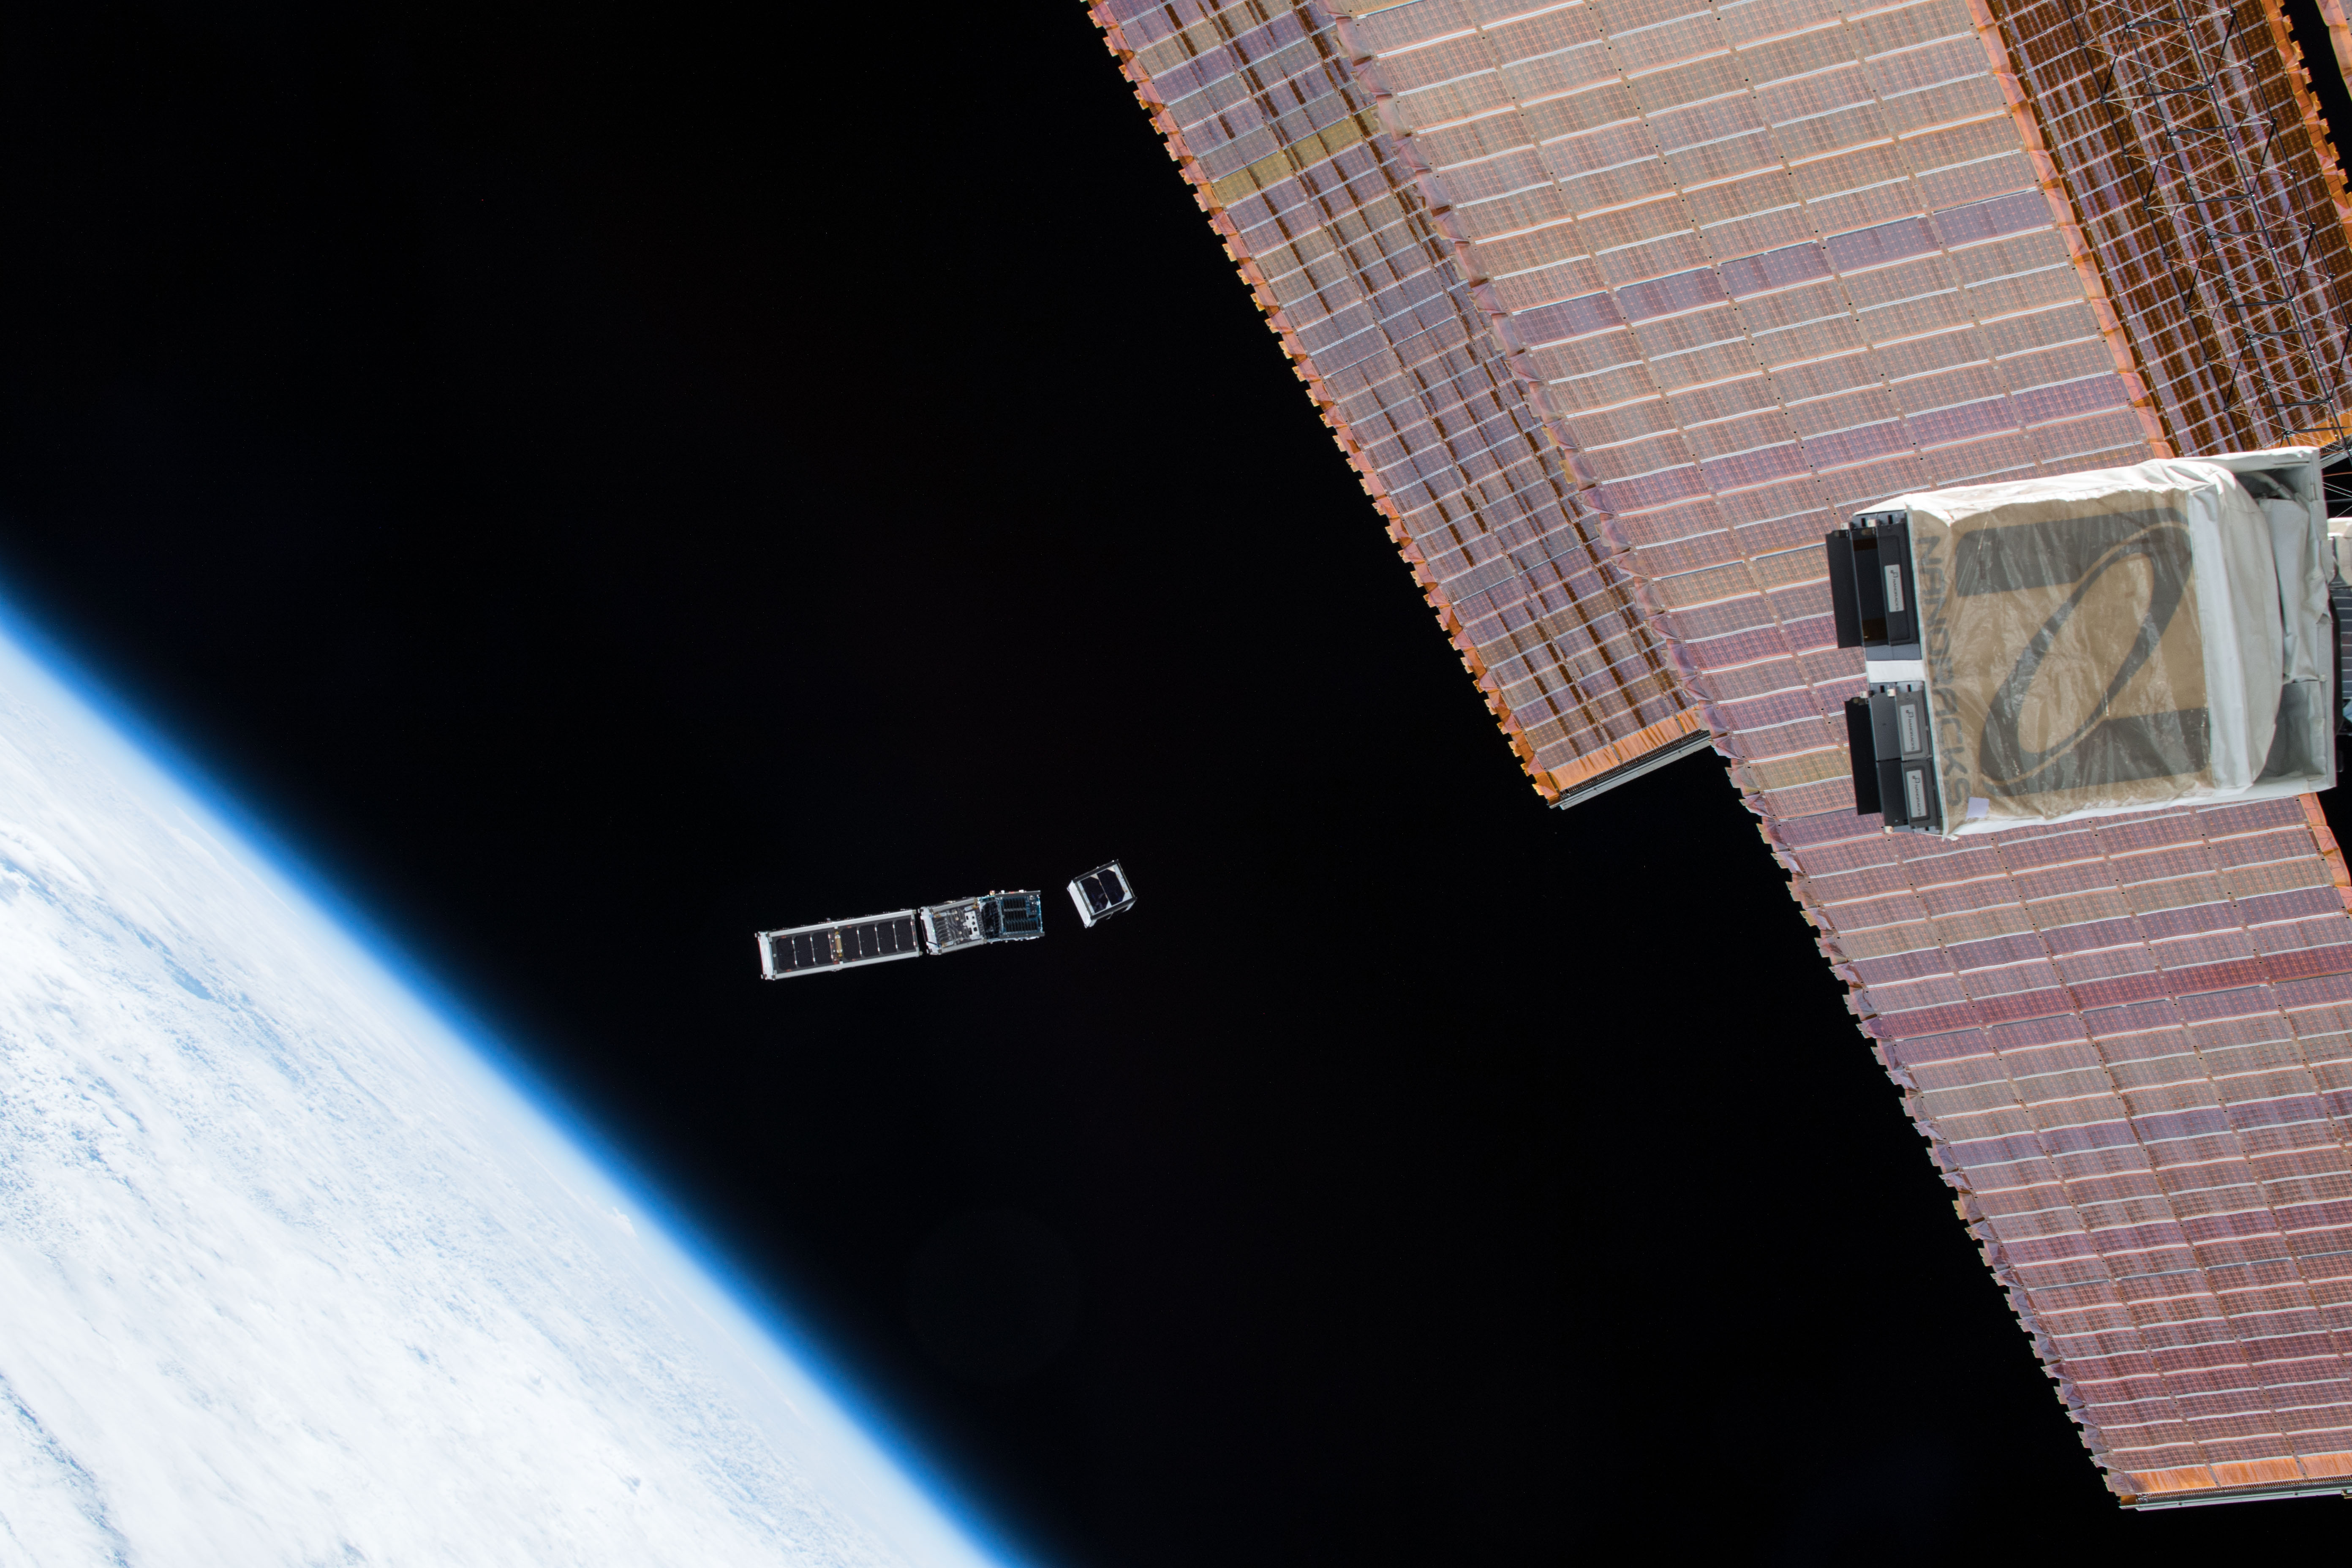 EQUiSat as it was deployed out of the ISS